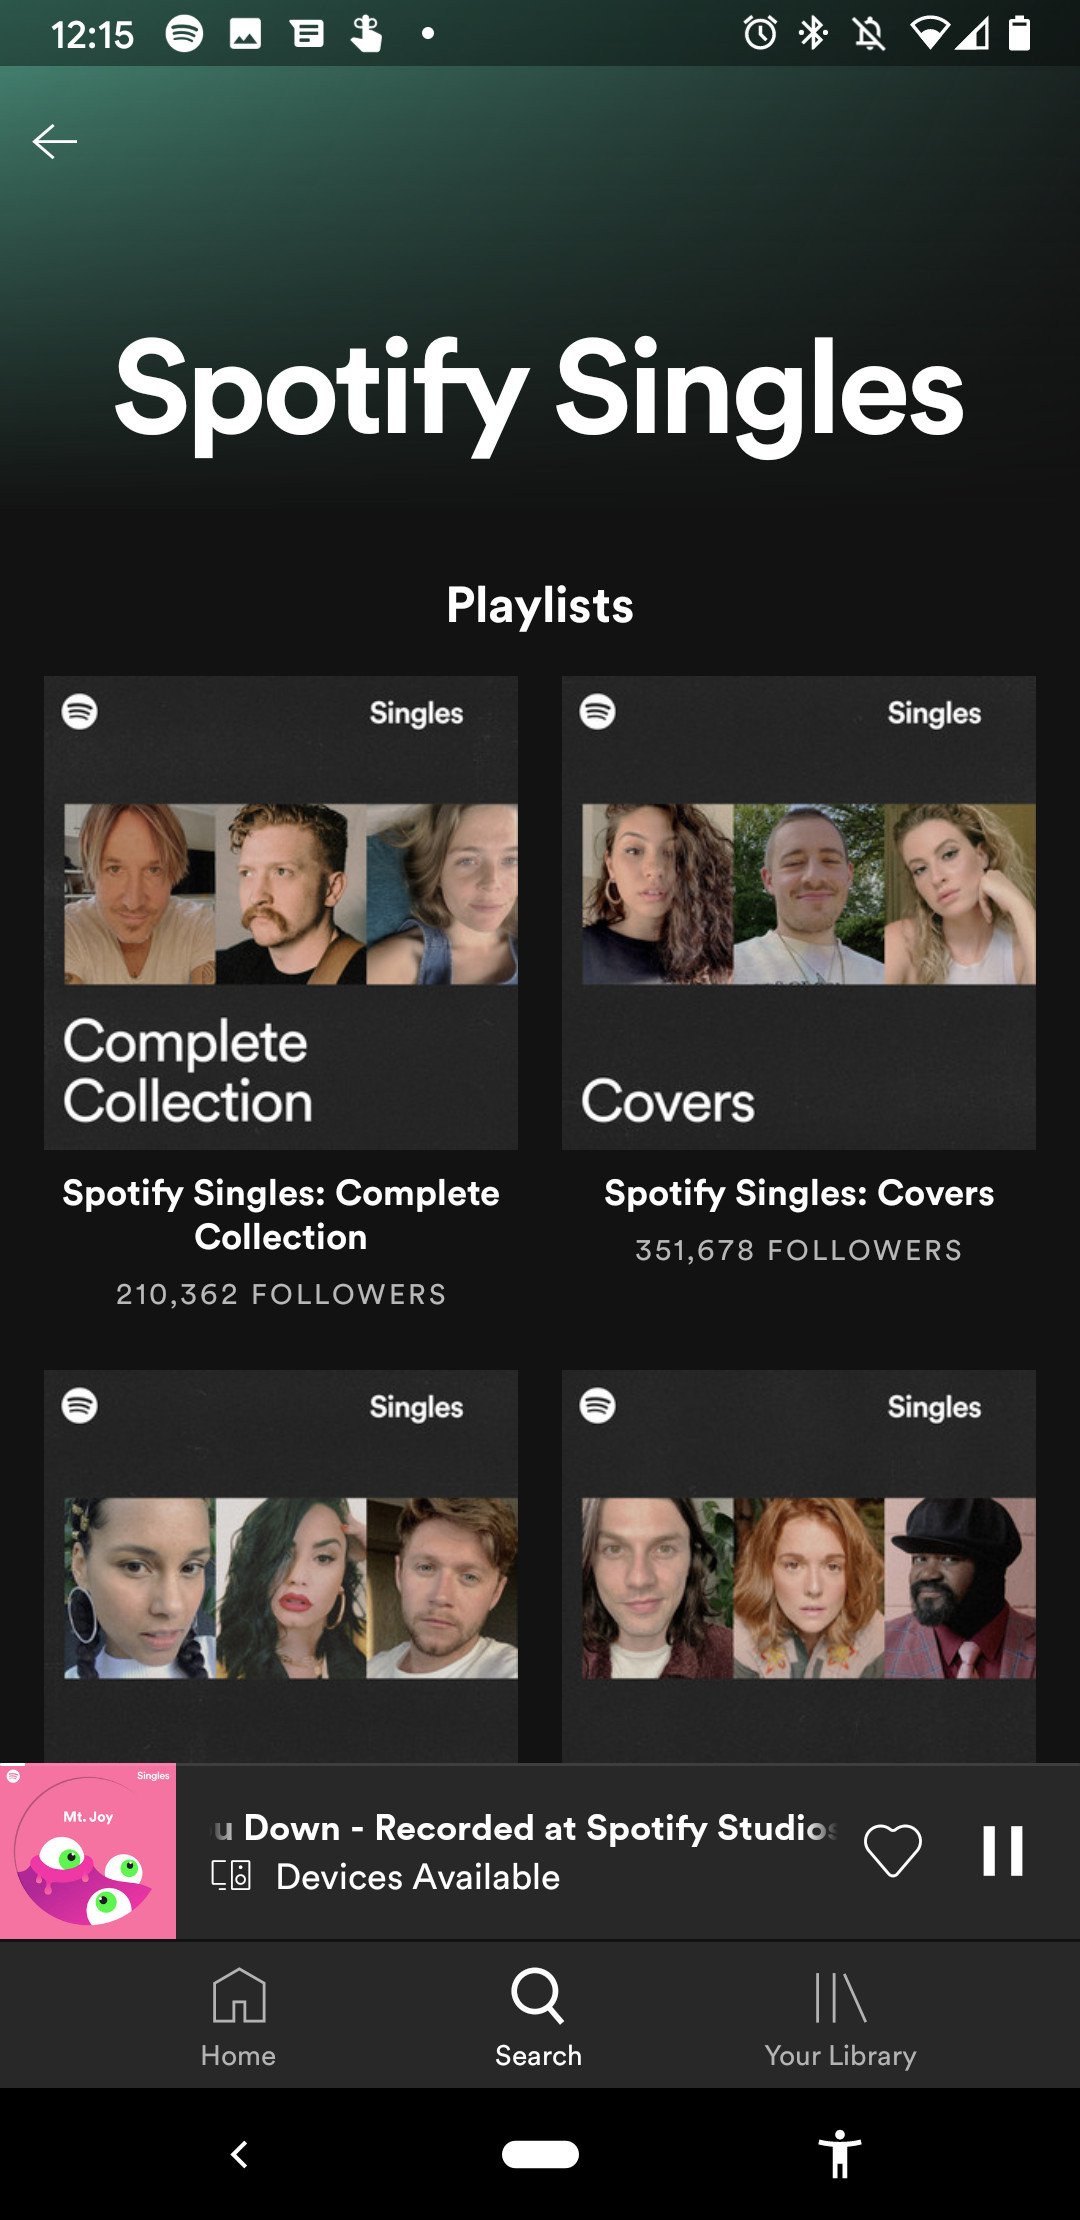 A screenshot of Spotify Singles on the mobile app used to illustrate feature differences between Tidal vs Spotify.